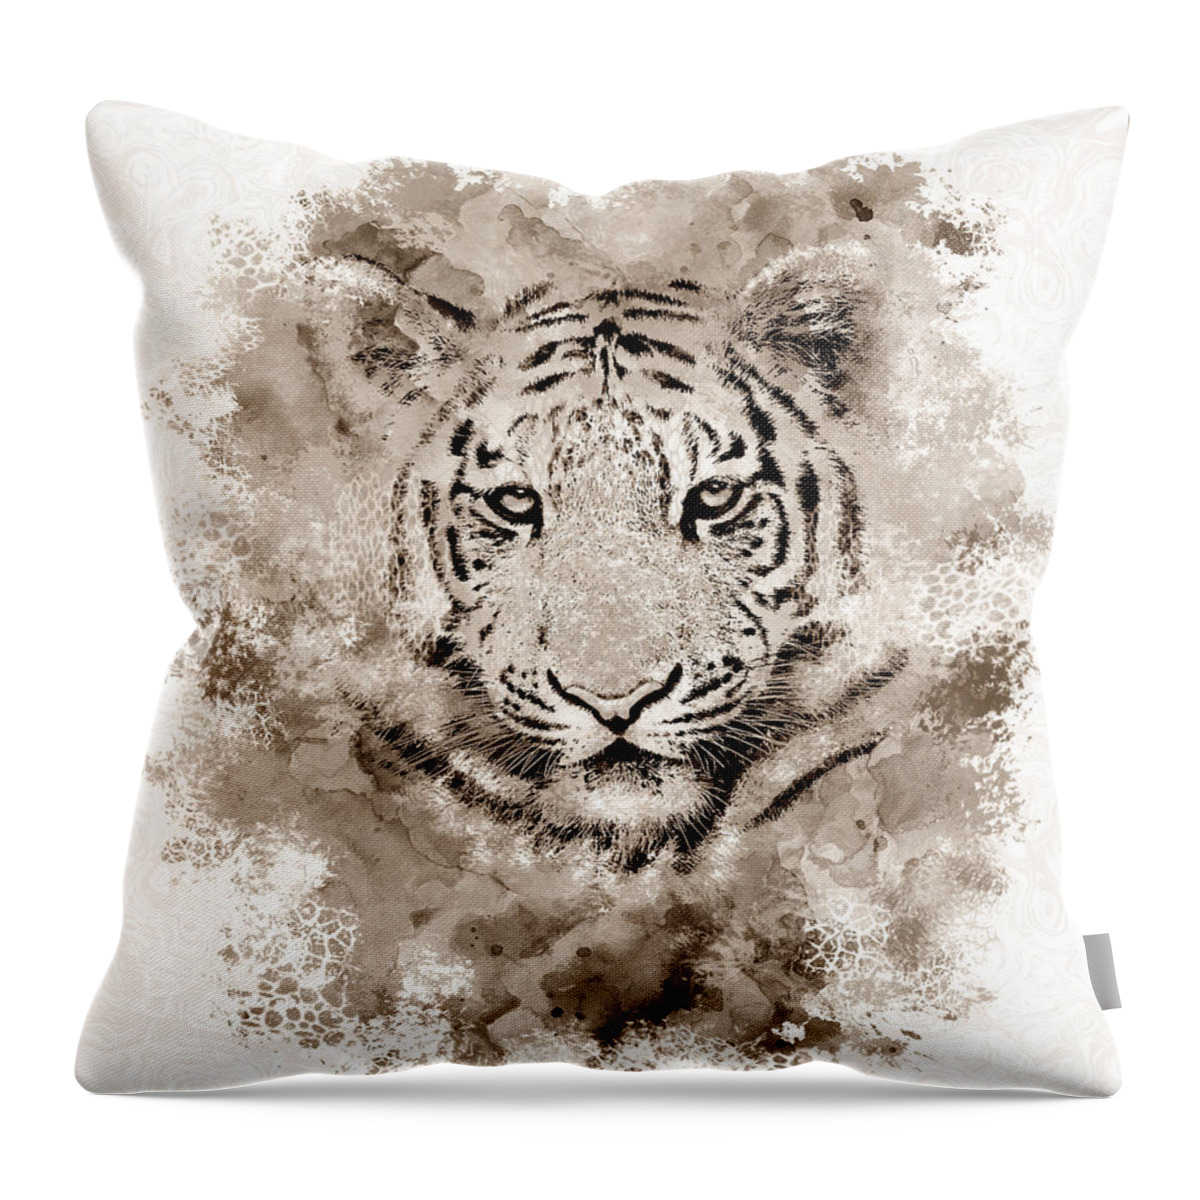 Tiger Throw Pillow featuring the digital art Tiger 4 by Lucie Dumas